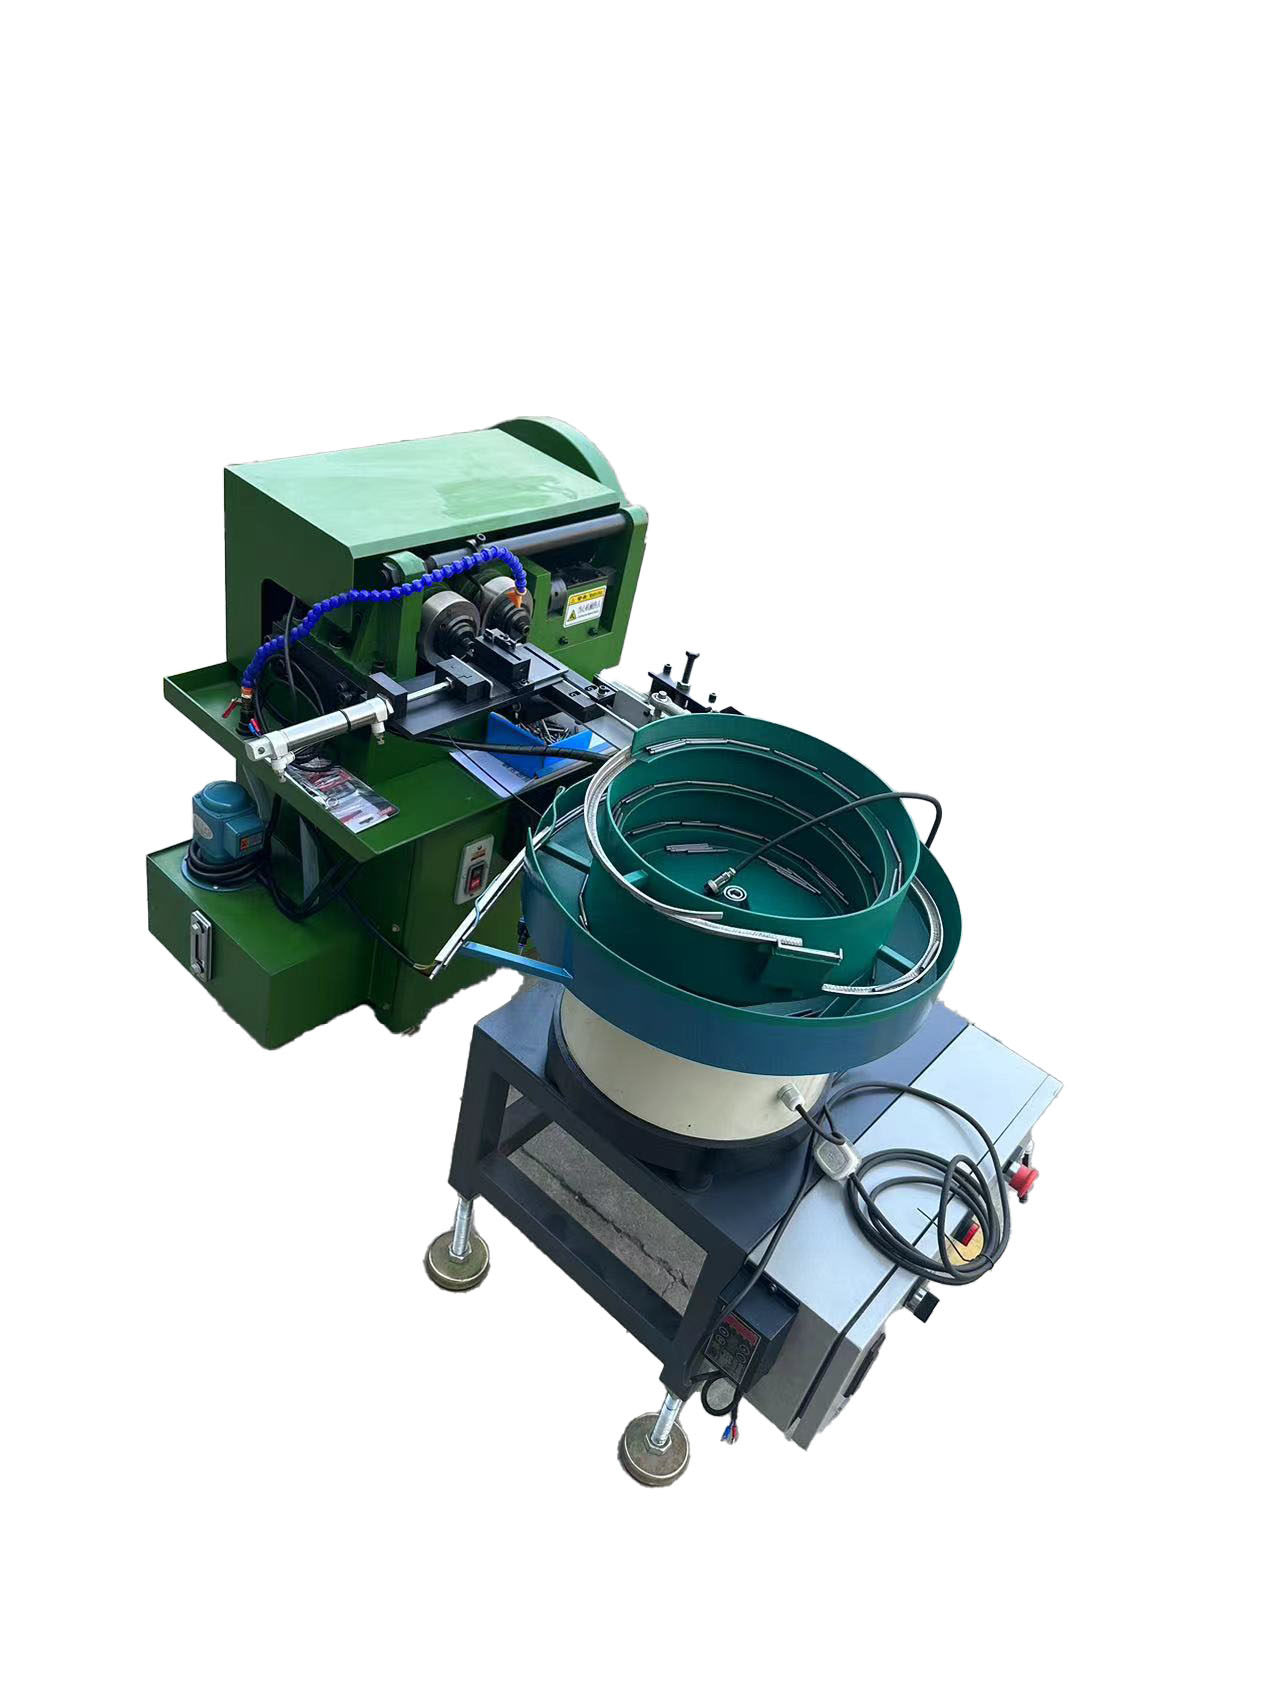 To improve production efficiency, choose a suitable eccentric thread rolling machine.